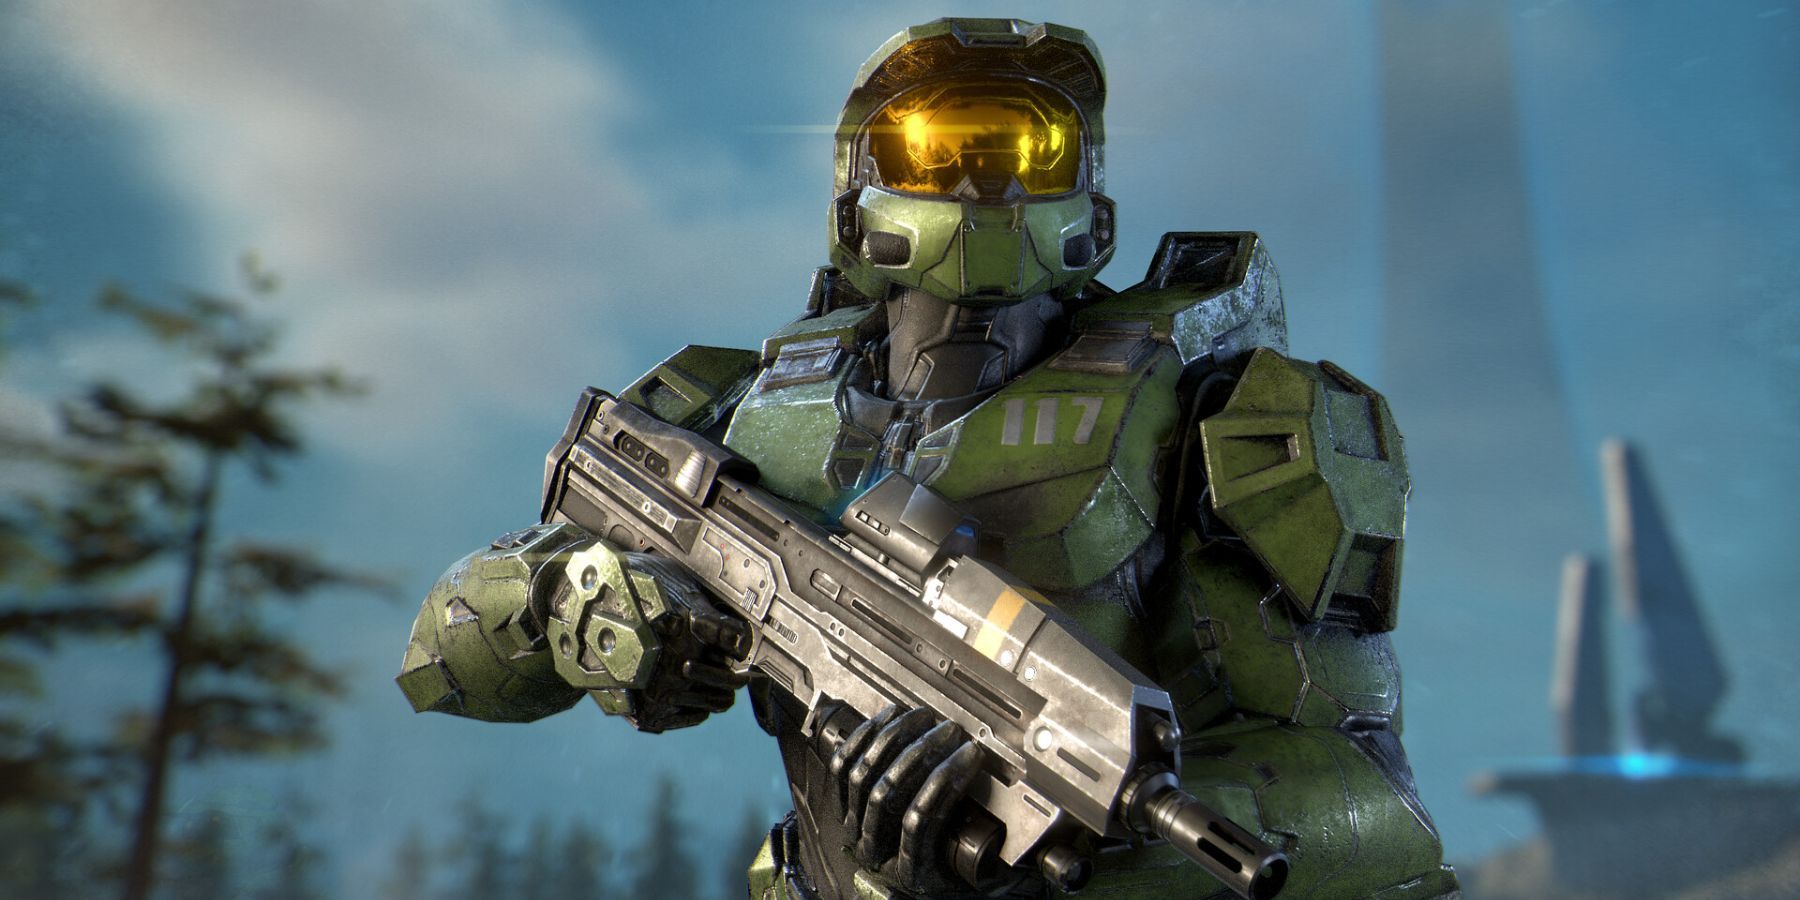 Master Chief preparing for a mission